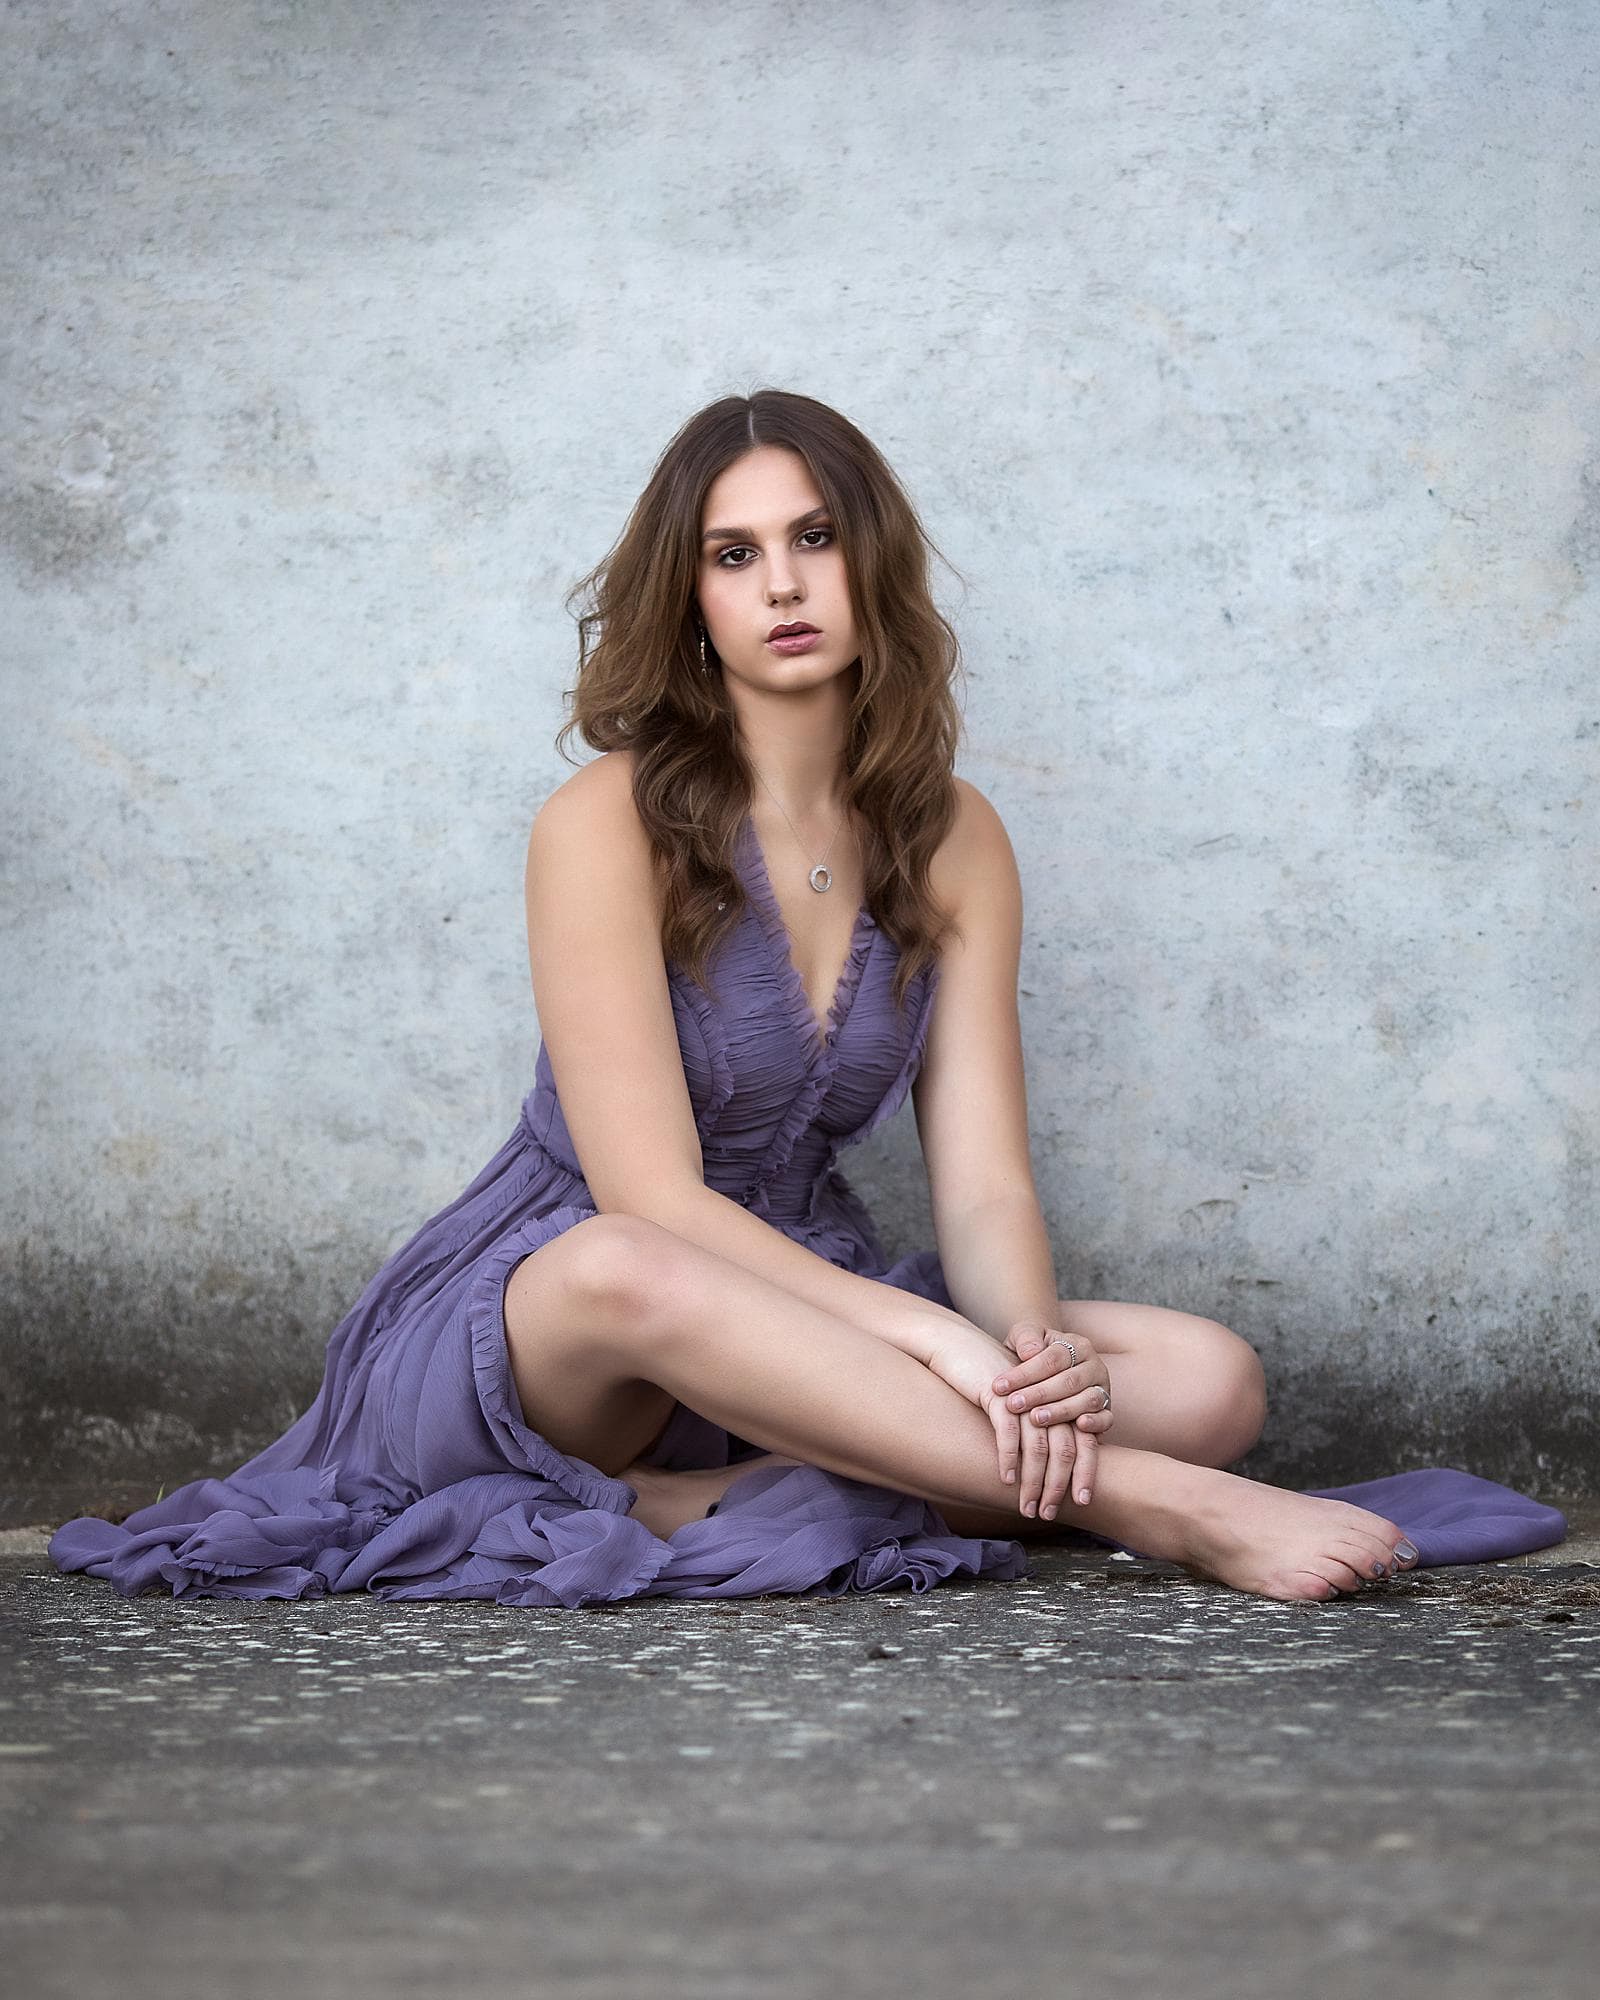 Woman in a purply dress sits on the ground and against a concrete wall